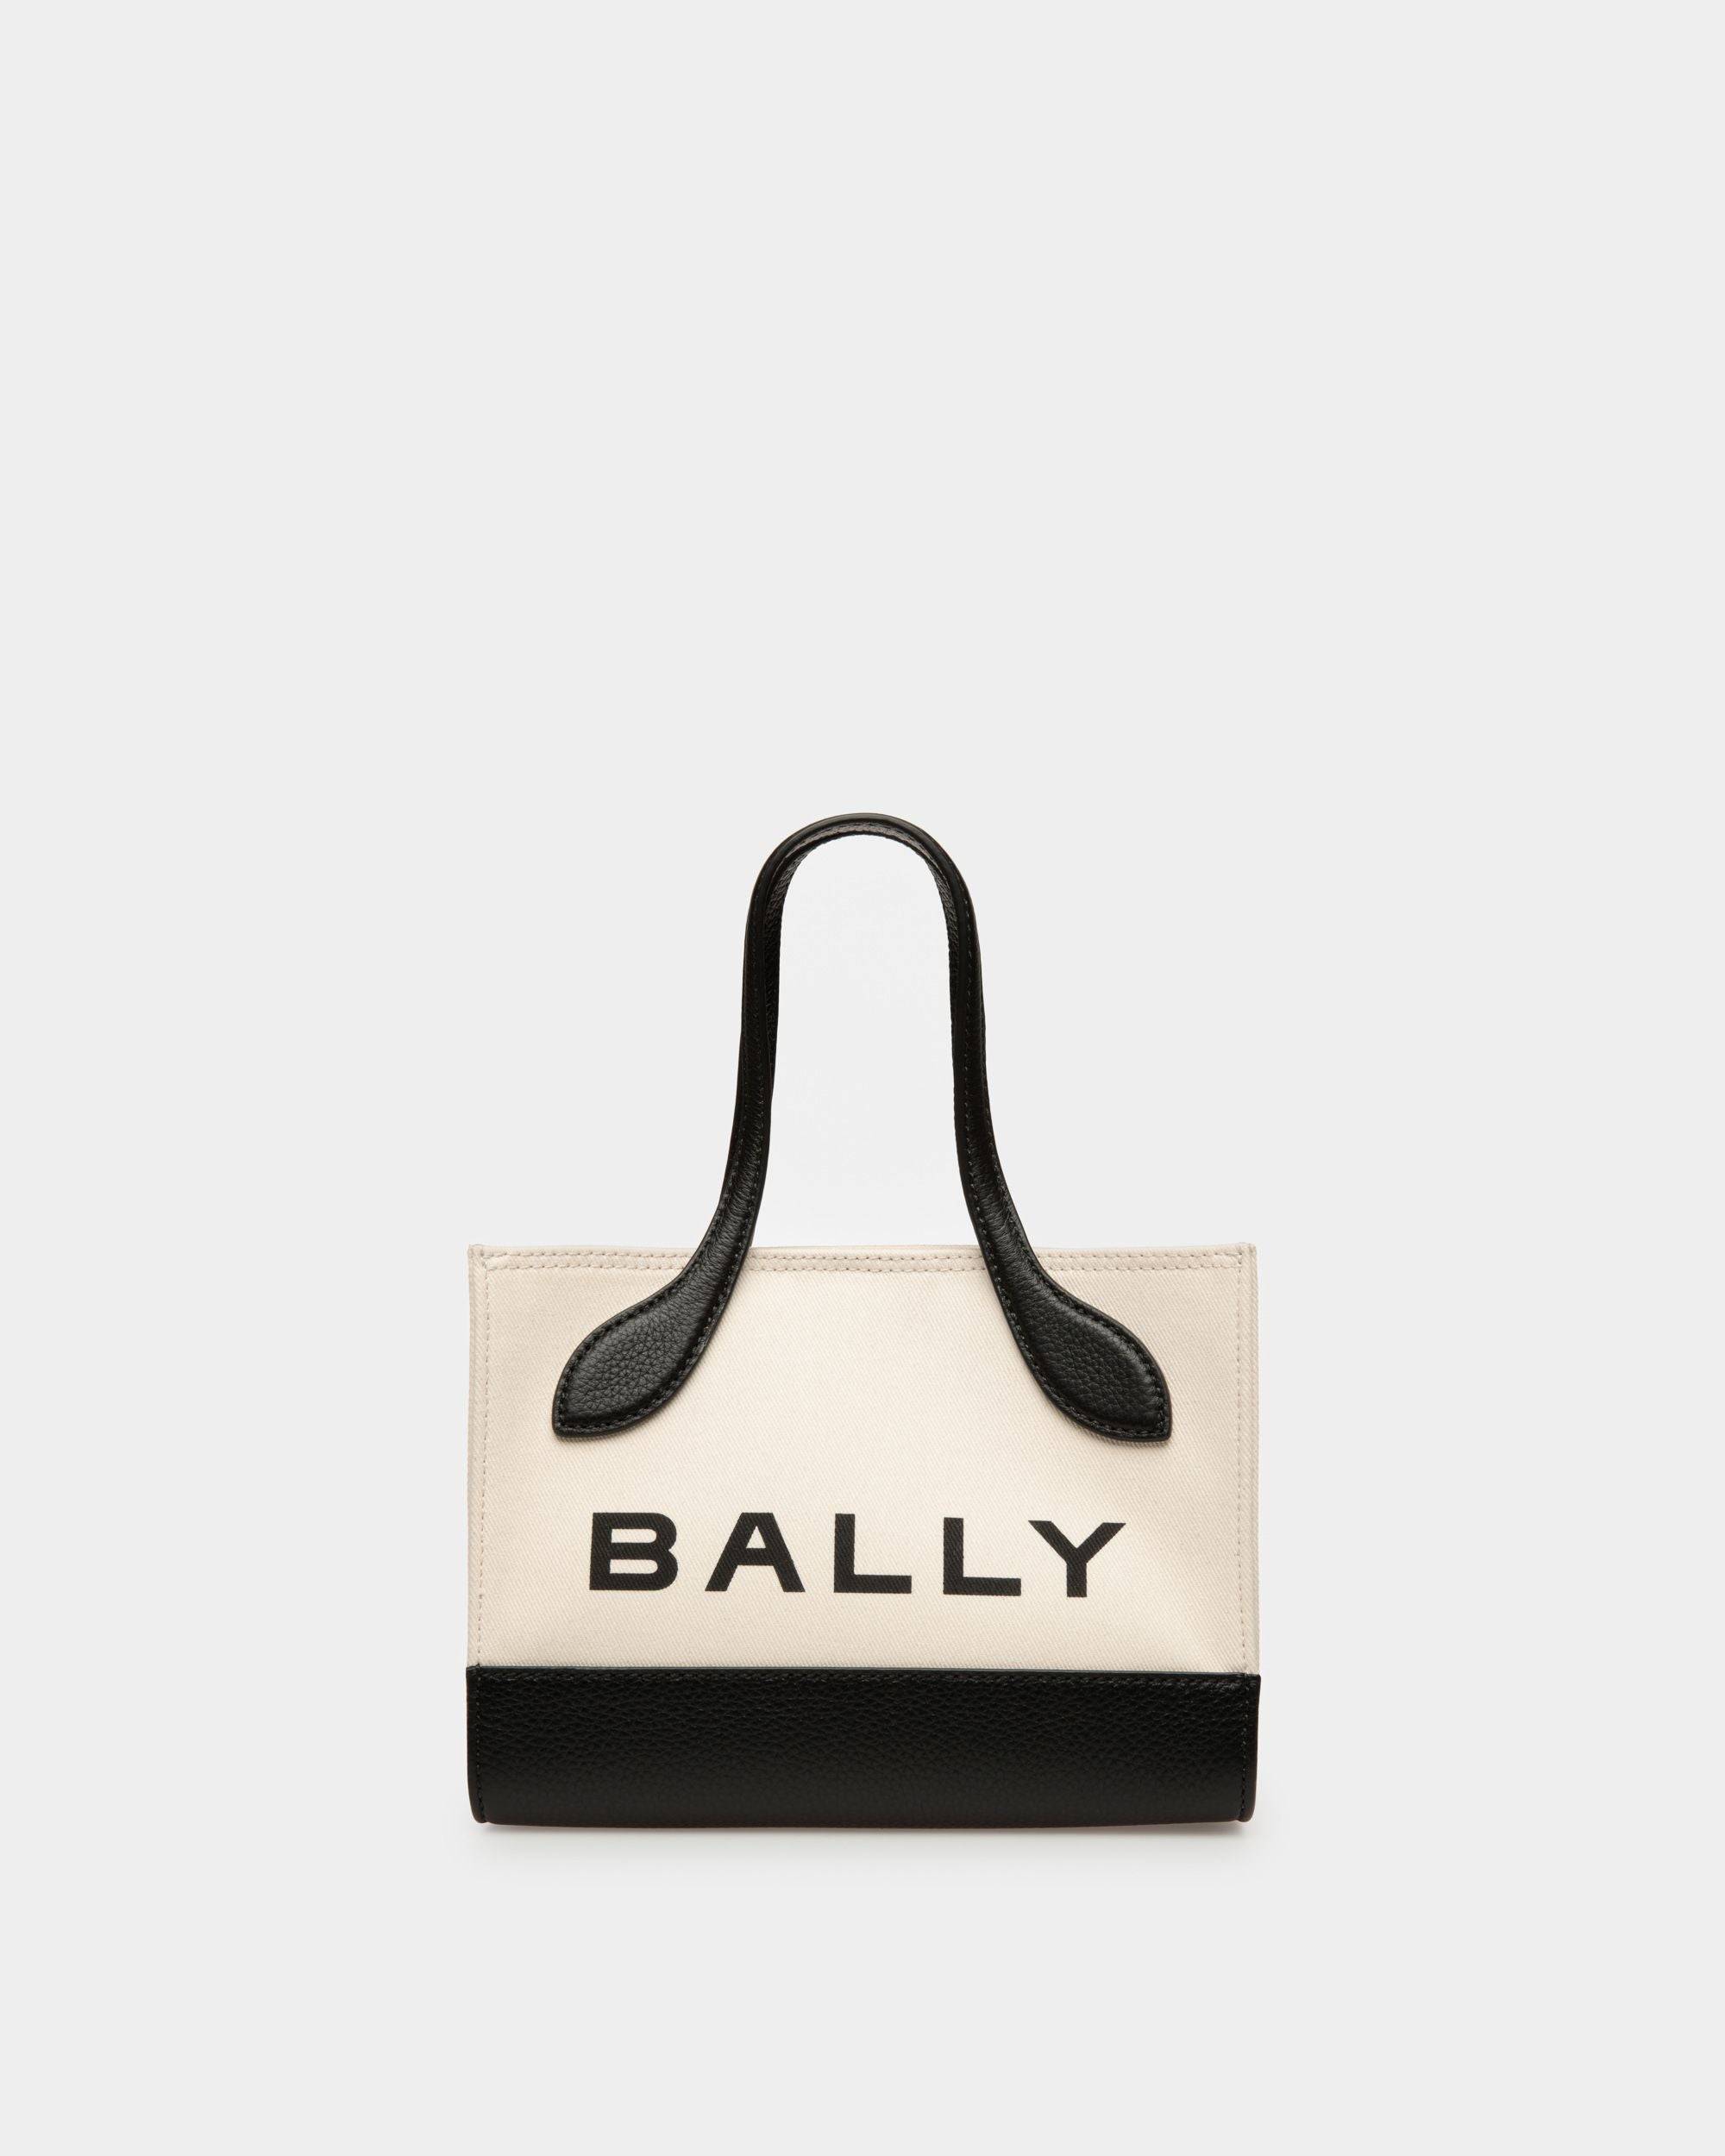 Keep On Extra Small | Women's Minibag | Natural And Black Fabric | Bally | Still Life Front